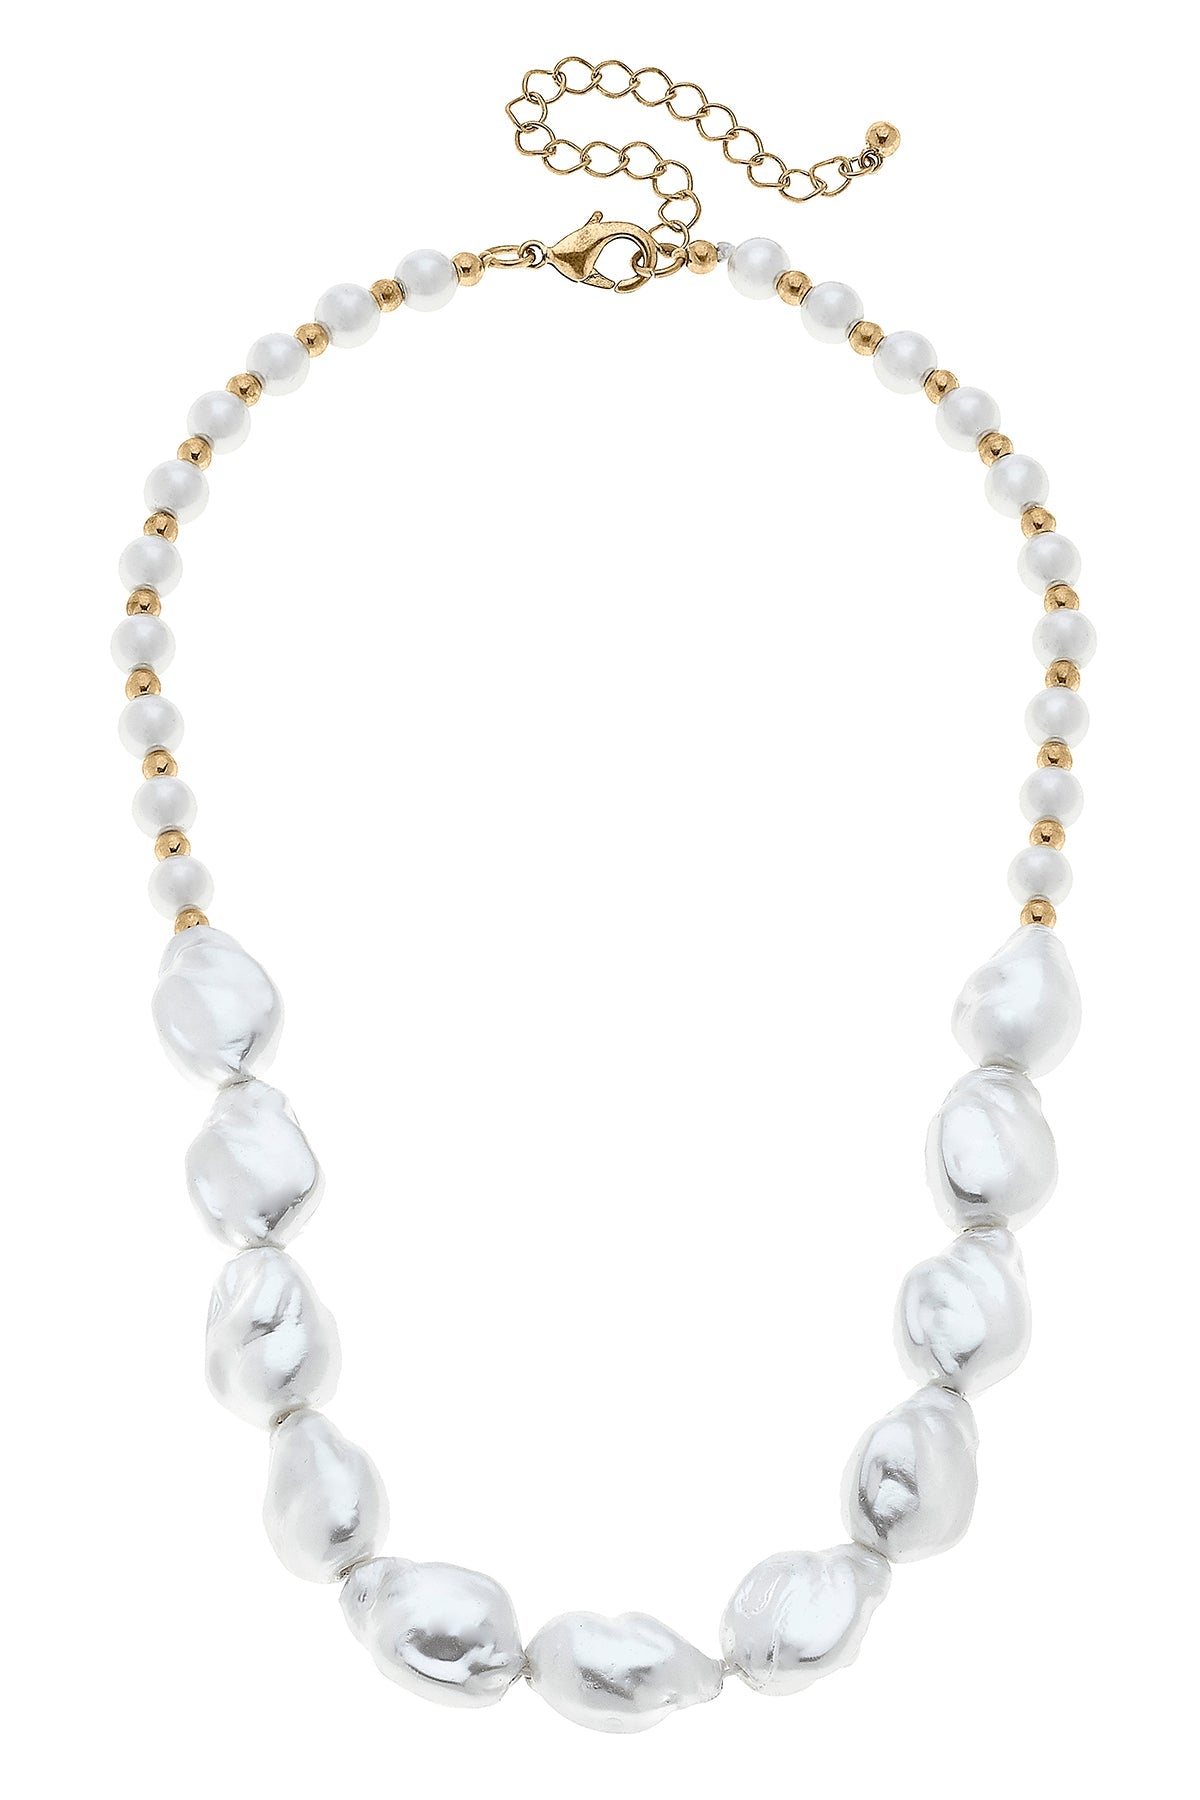 Summer Baroque Pearl & Seed Bead Necklace in Ivory by CANVAS